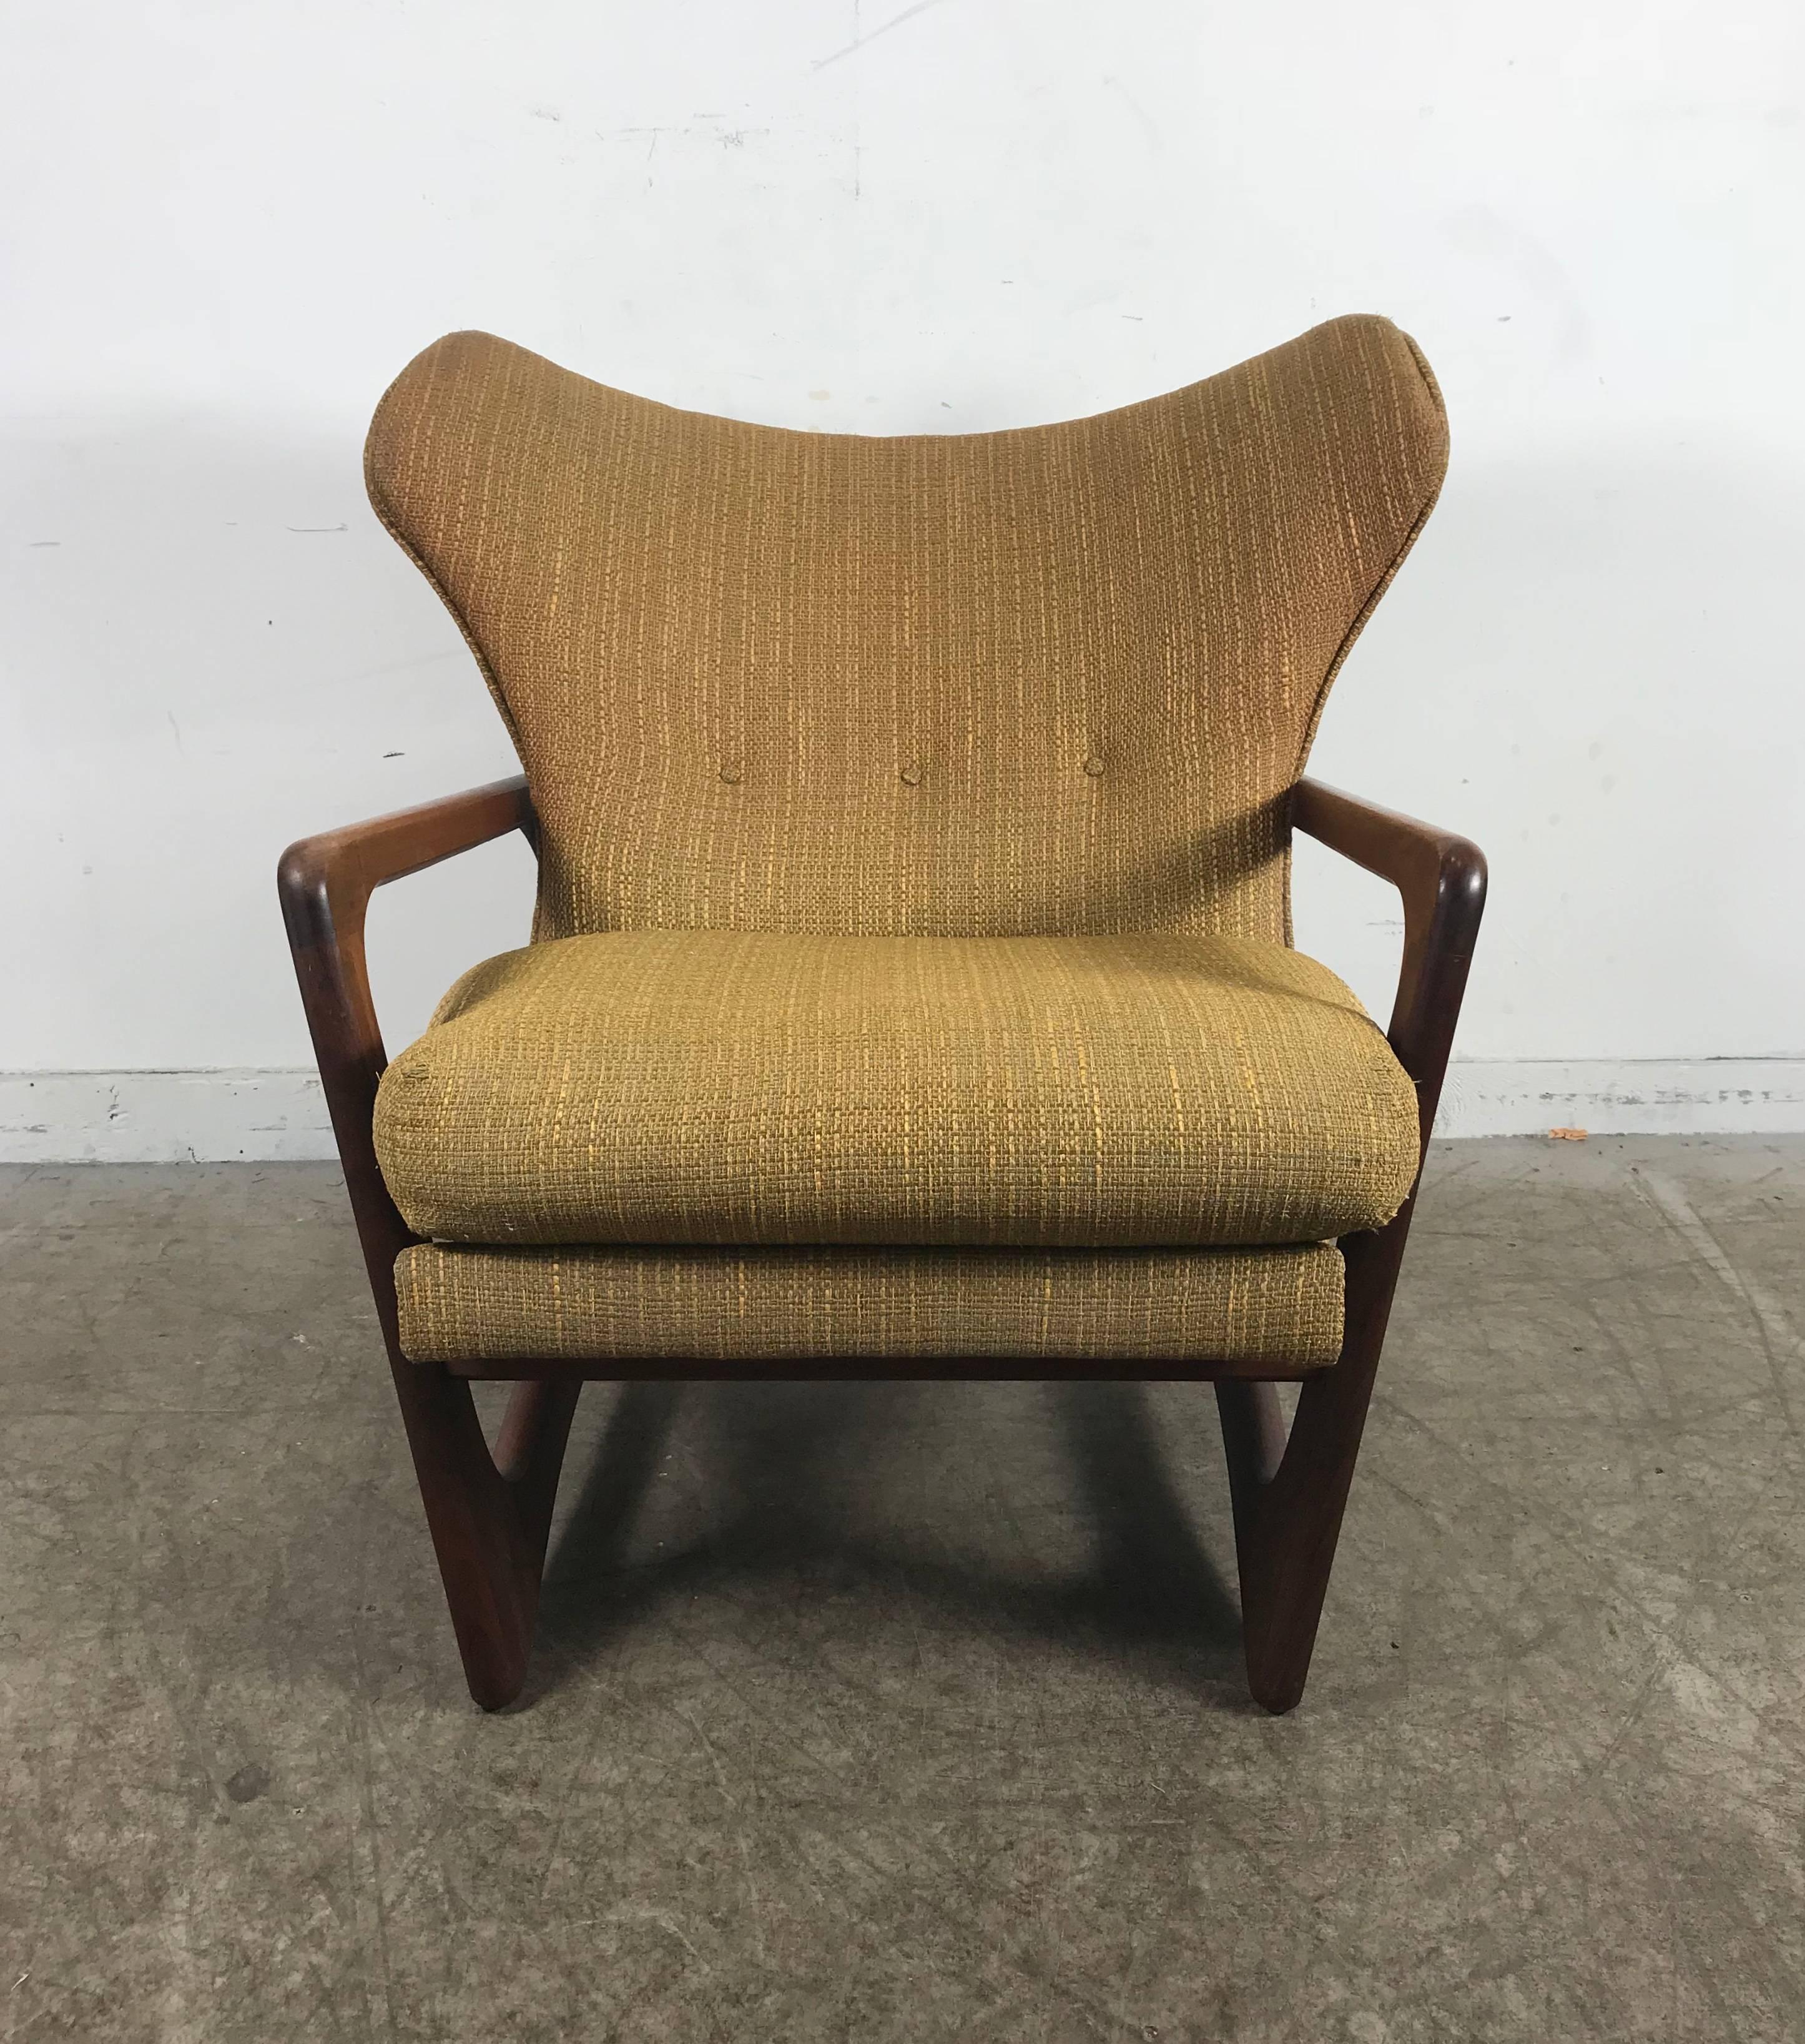 Fabric Modernist Sculptural Walnut Wing Back Lounge Chair by Adrian Pearsall